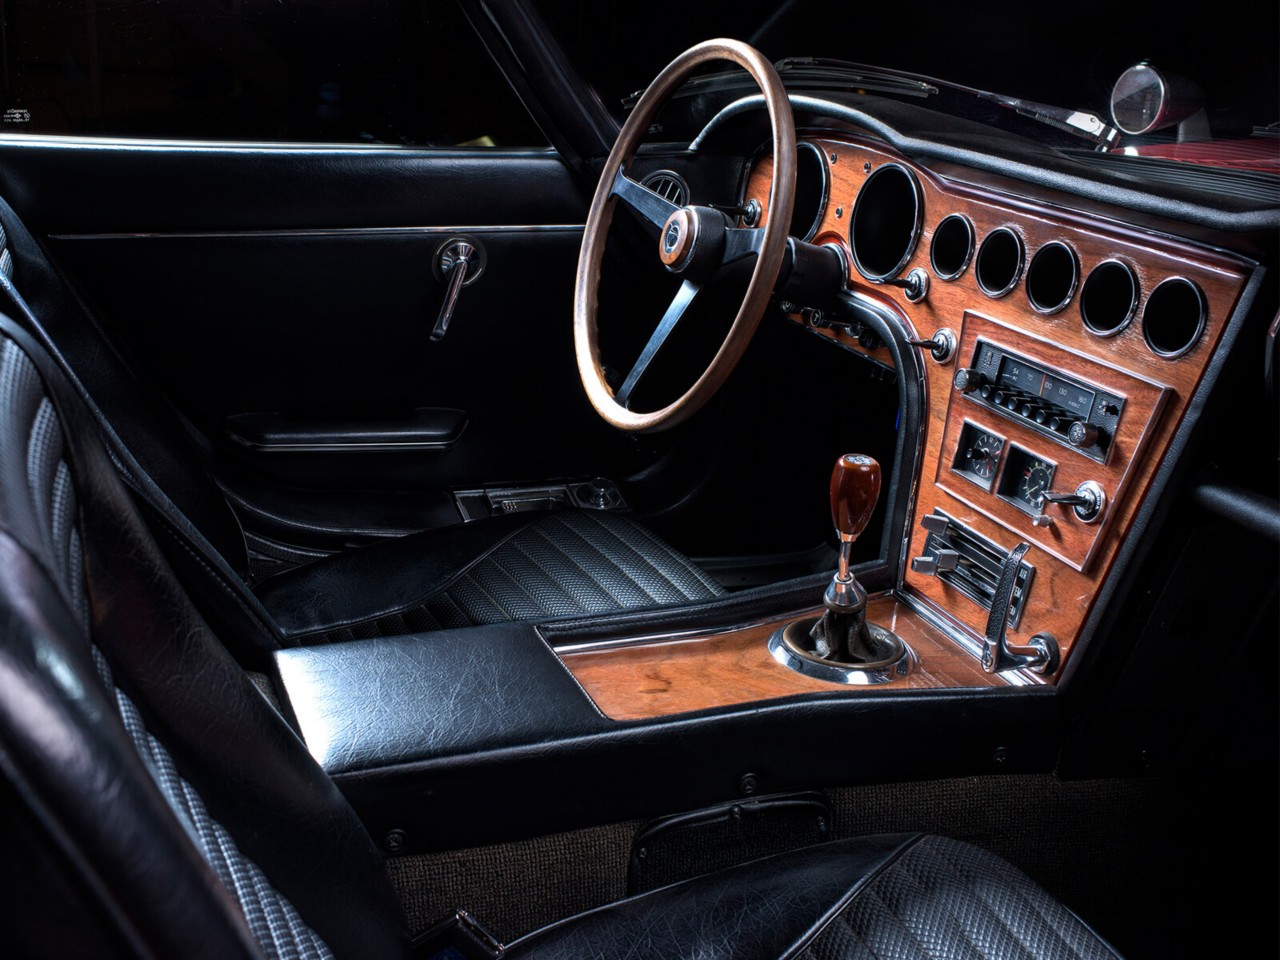 Toyota 2000GT car in red interior close up